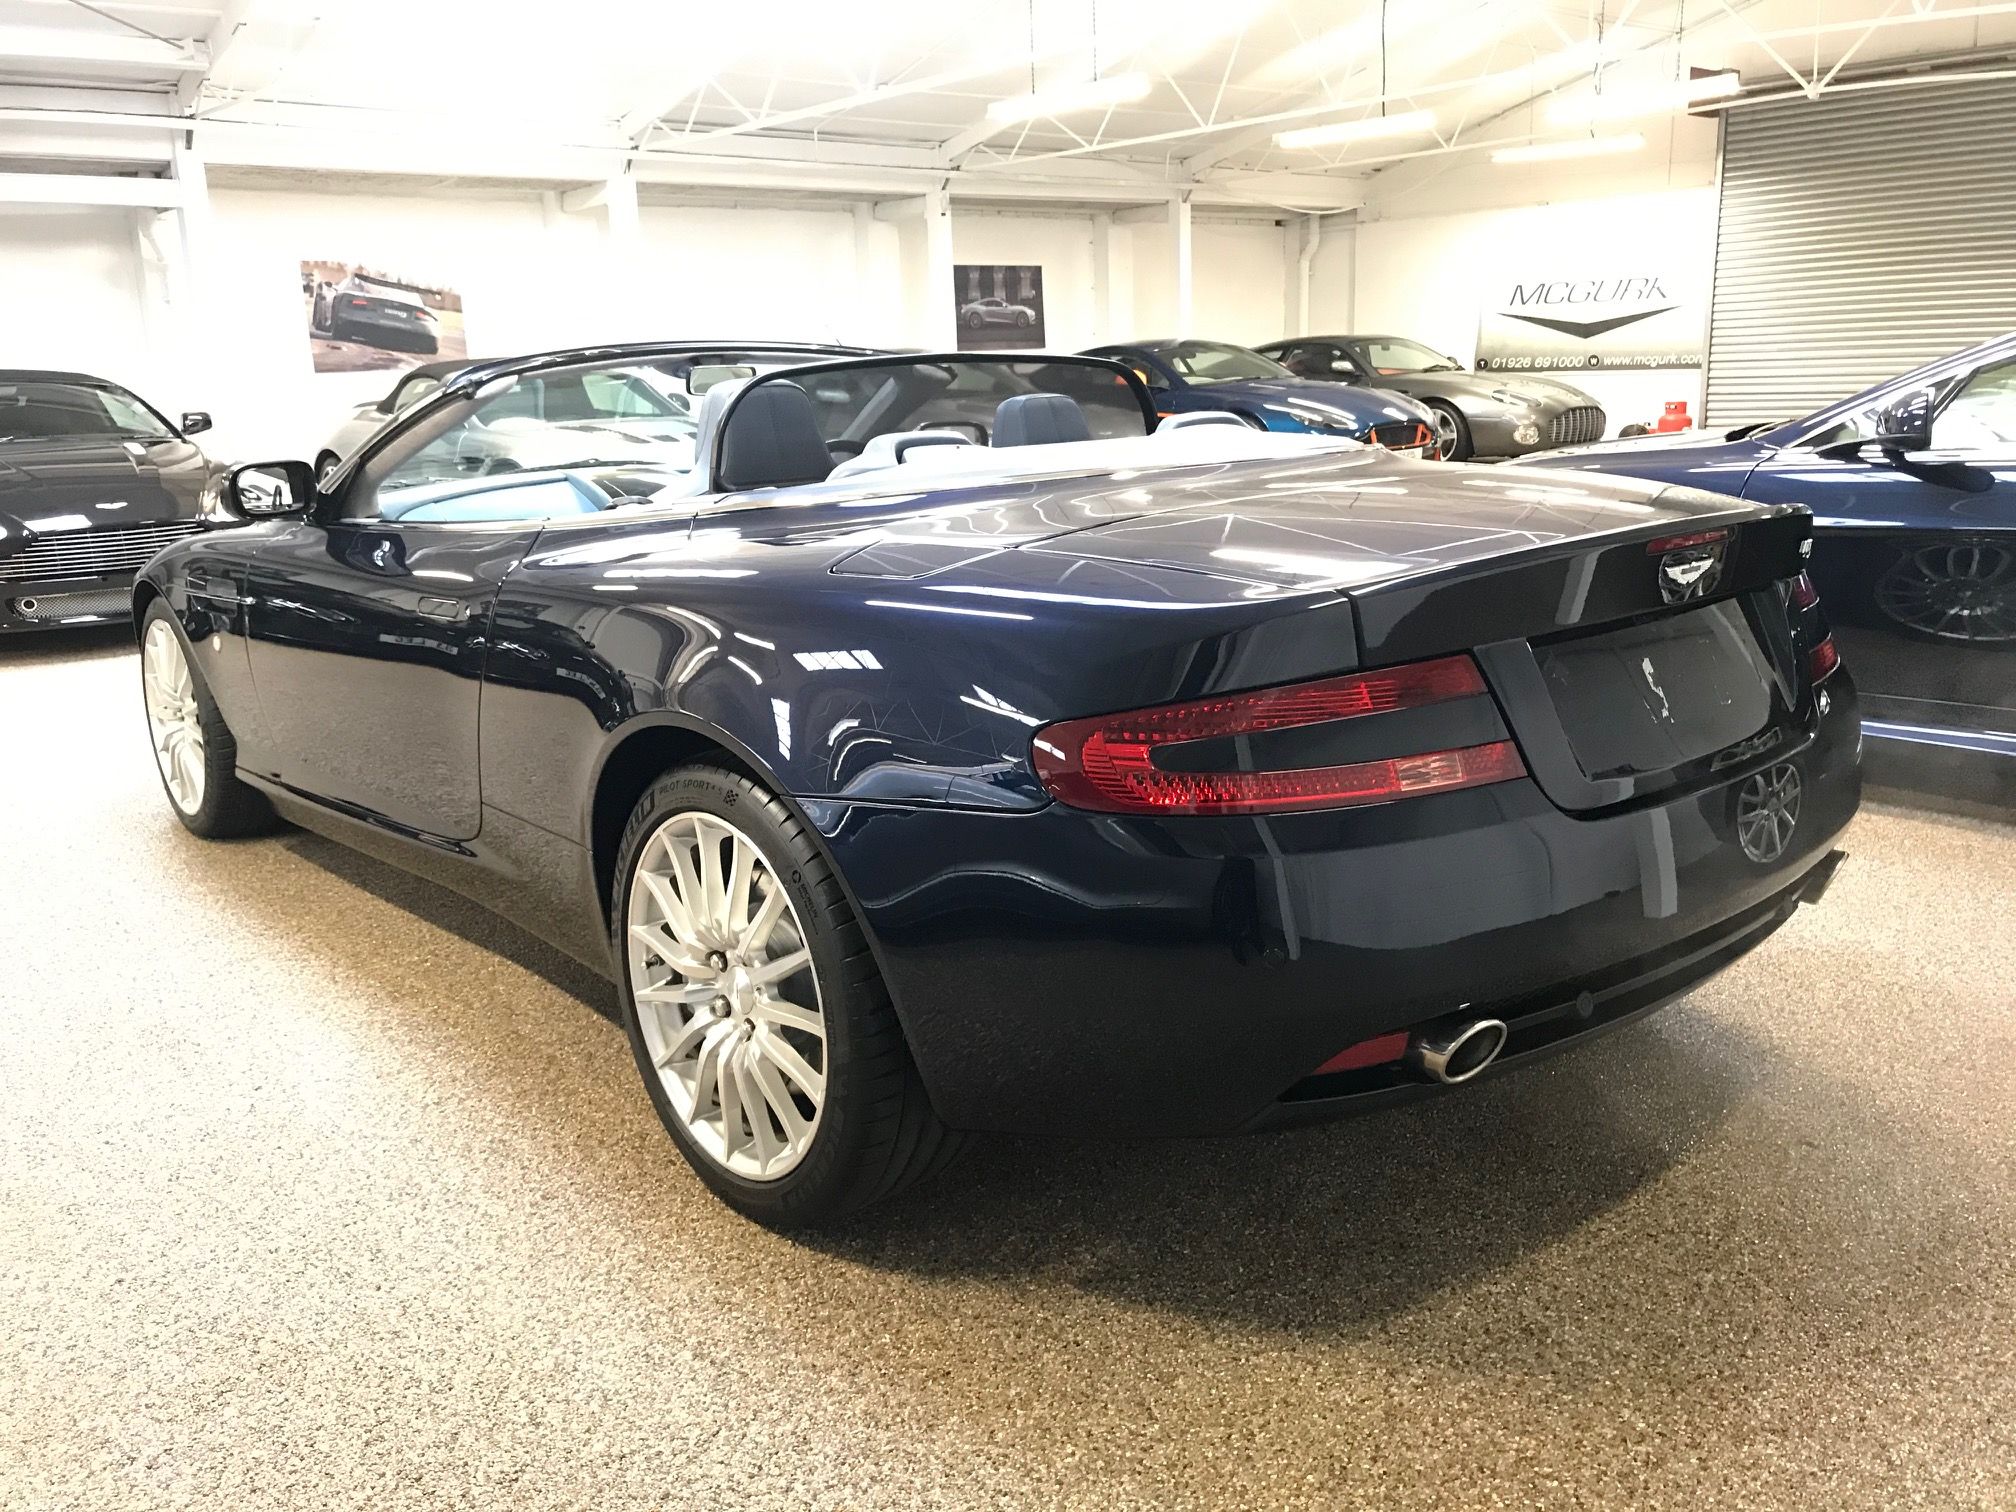 Used DB9 Volante for sale